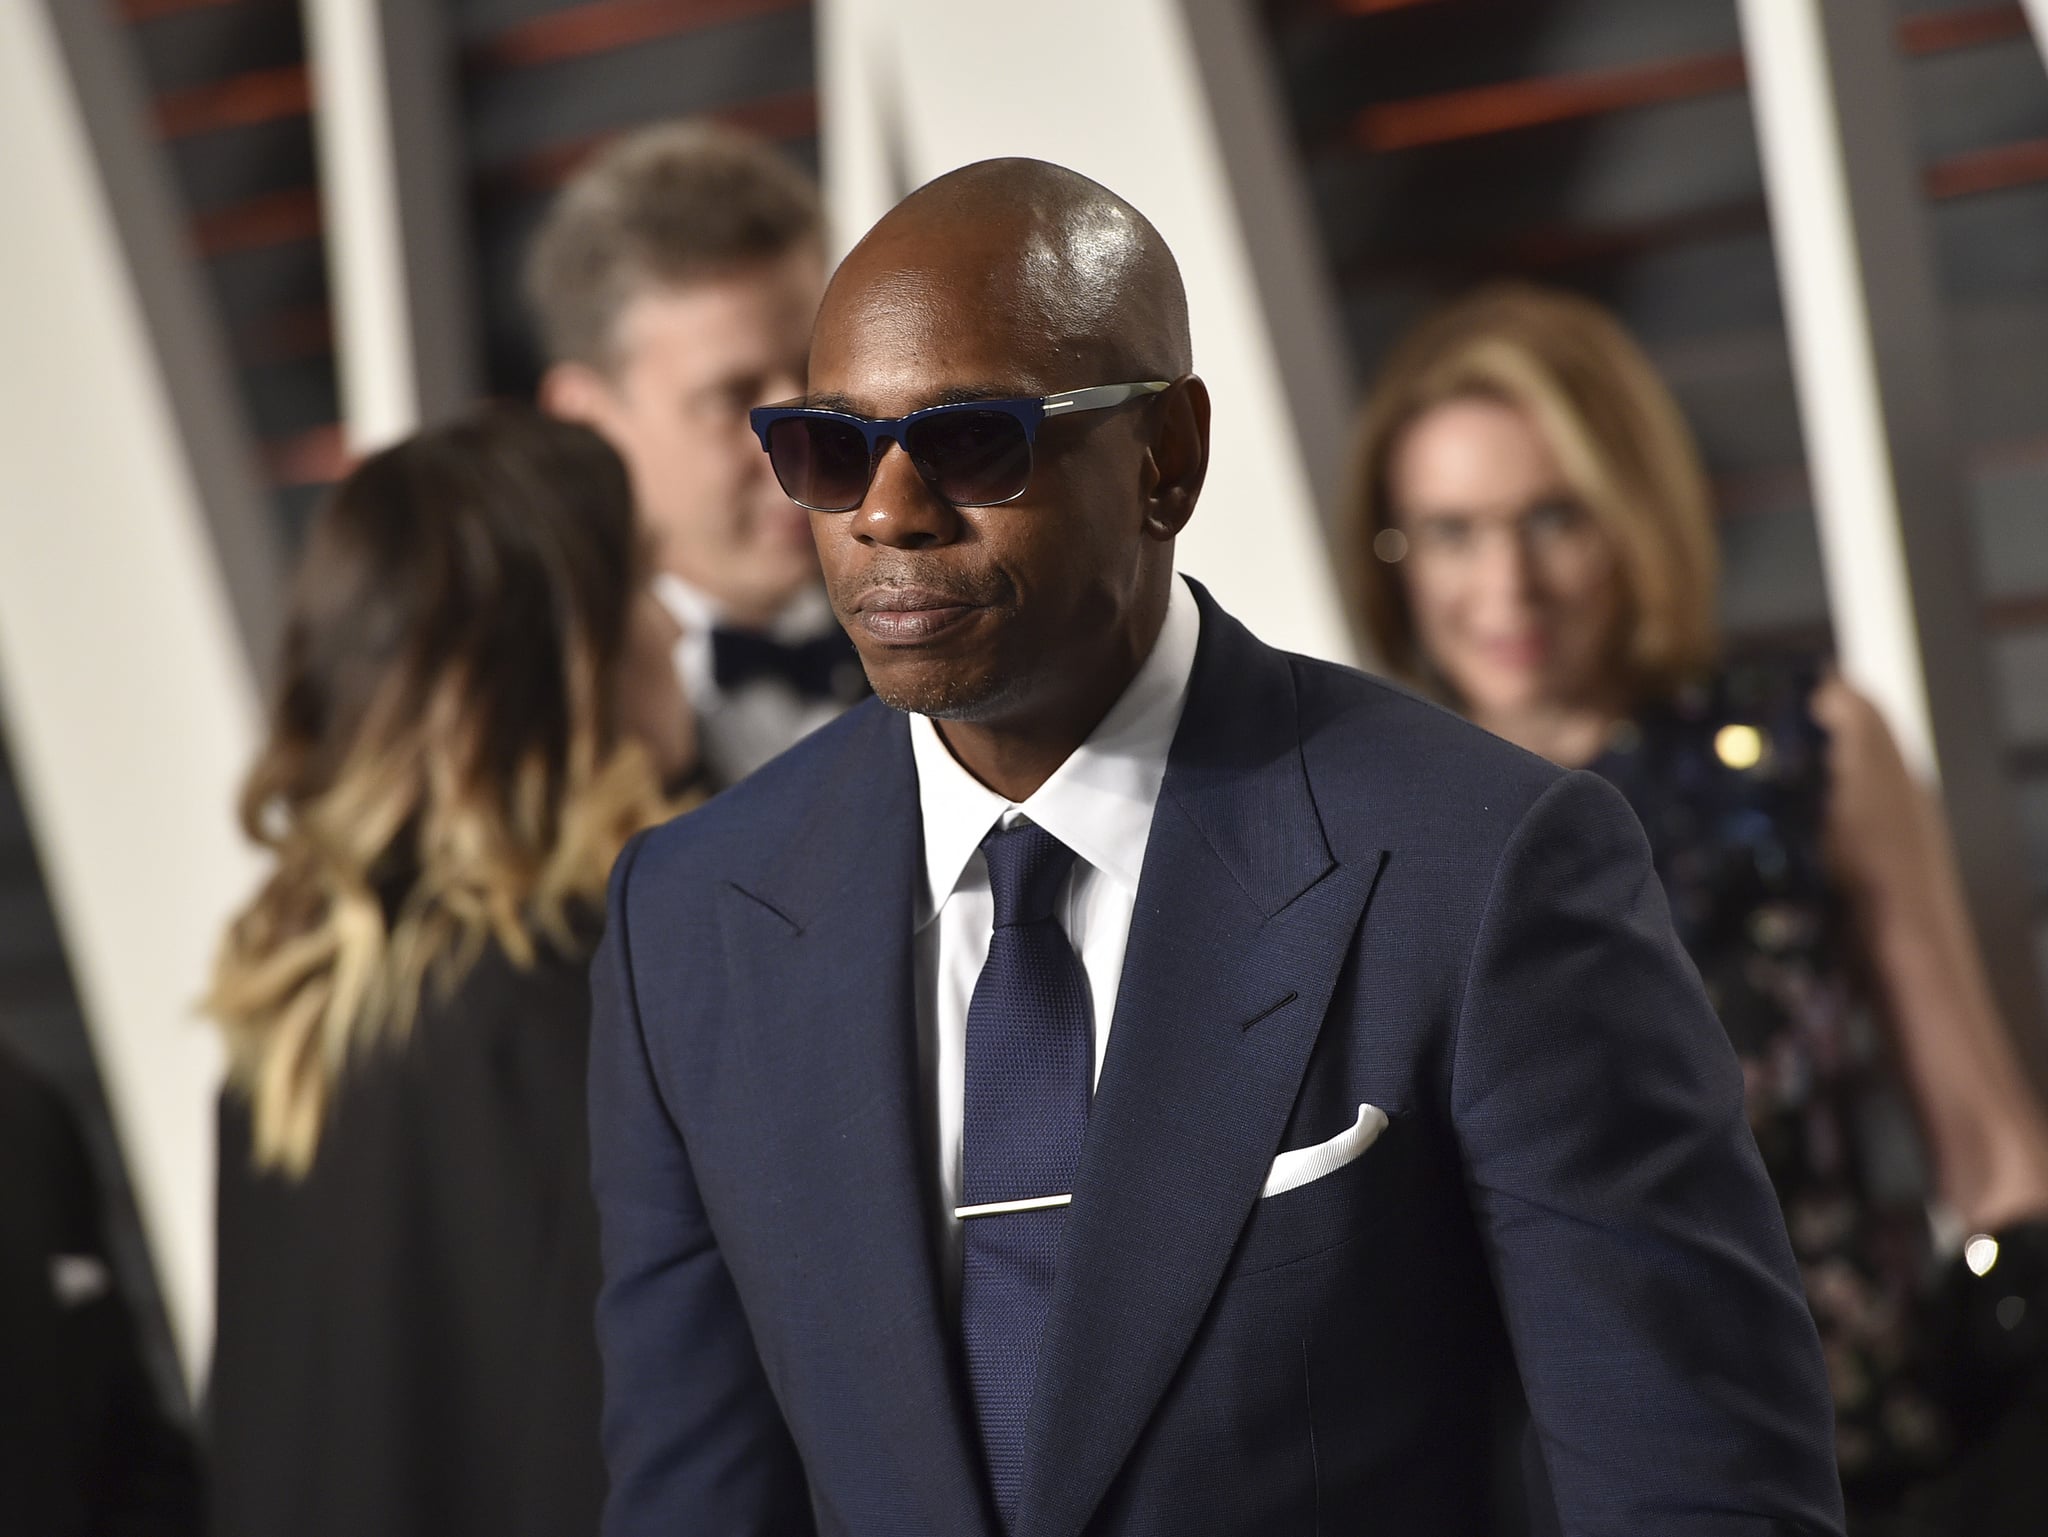 BEVERLY HILLS, CA - FEBRUARY 28:  Comedian Dave Chappelle arrives at the 2016 Vanity Fair Oscar Party Hosted By Graydon Carter at Wallis Annenberg Centre for the Performing Arts on February 28, 2016 in Beverly Hills, California.  (Photo by John Shearer/Getty Images)